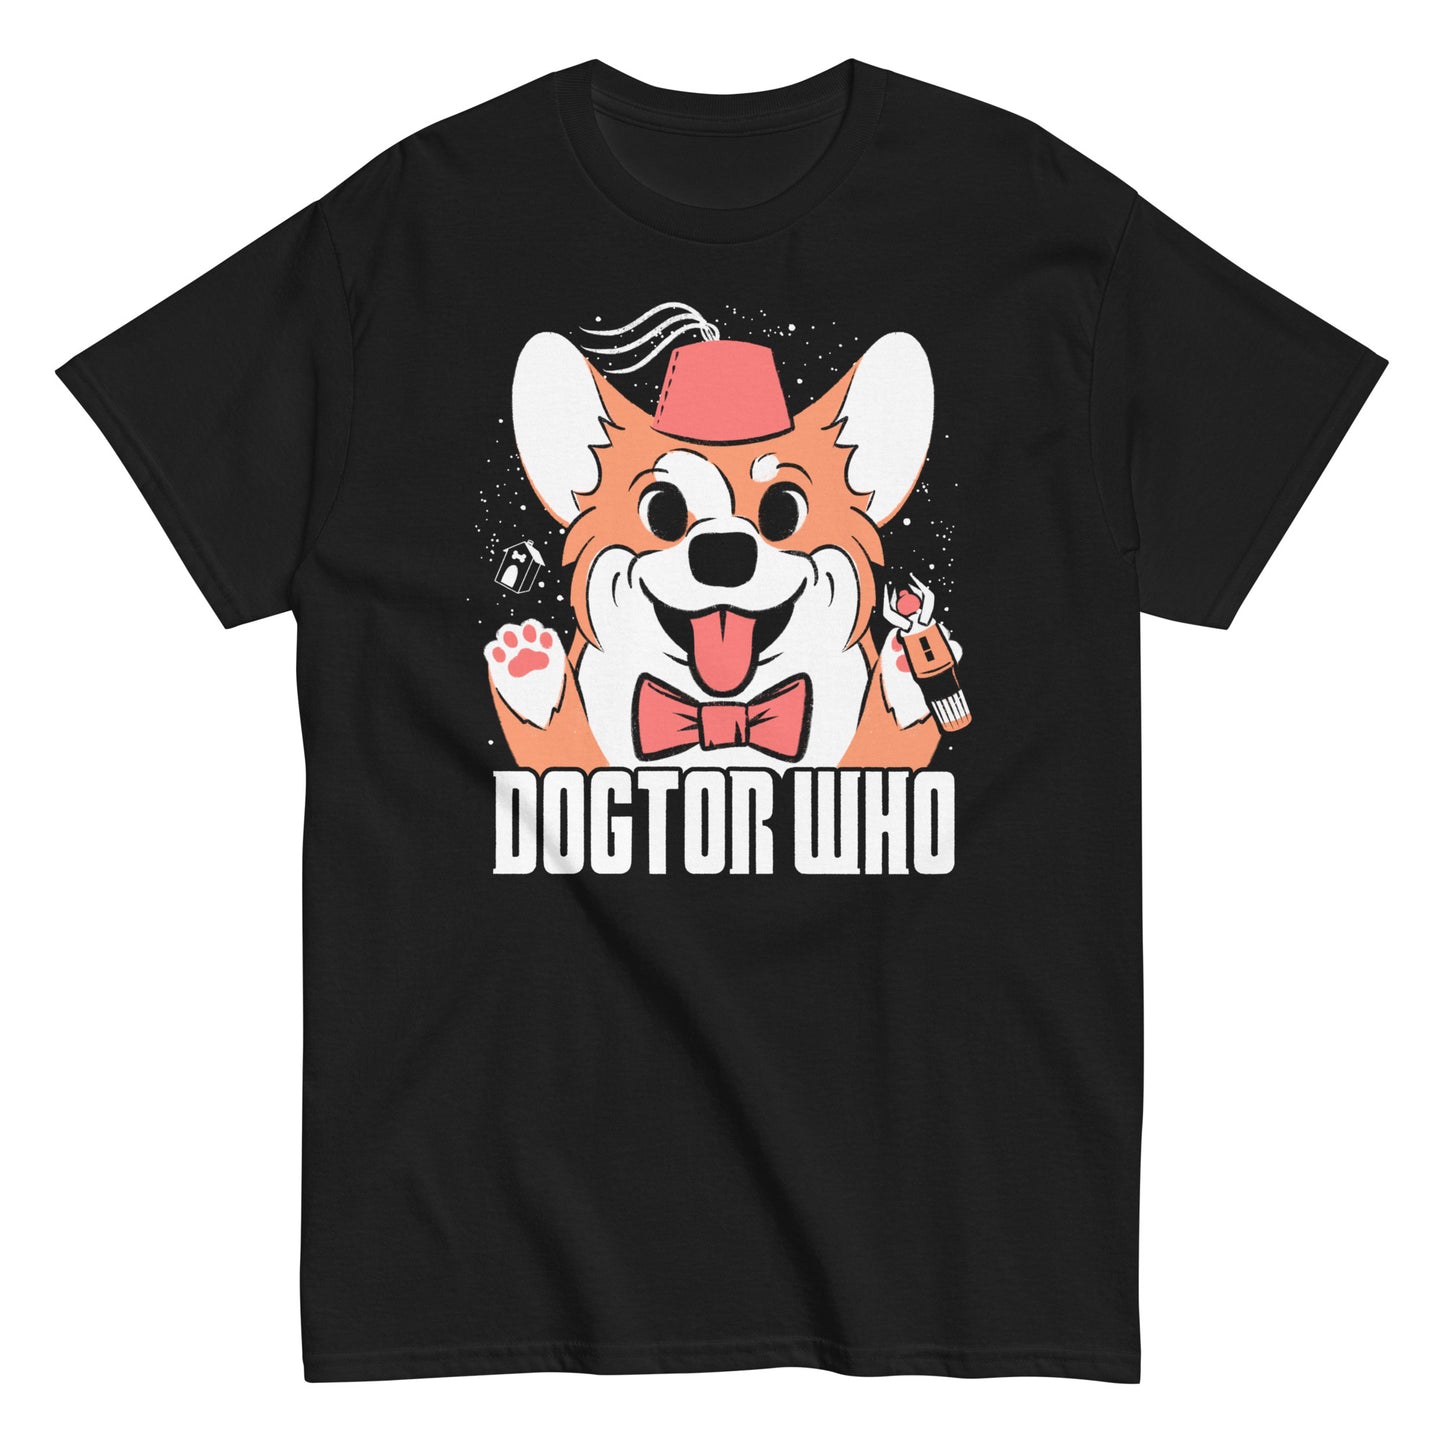 Dogtor Who - Funny Corgi Doctor Who T-Shirt for Fans of Doctor Who Gifts Retro TV